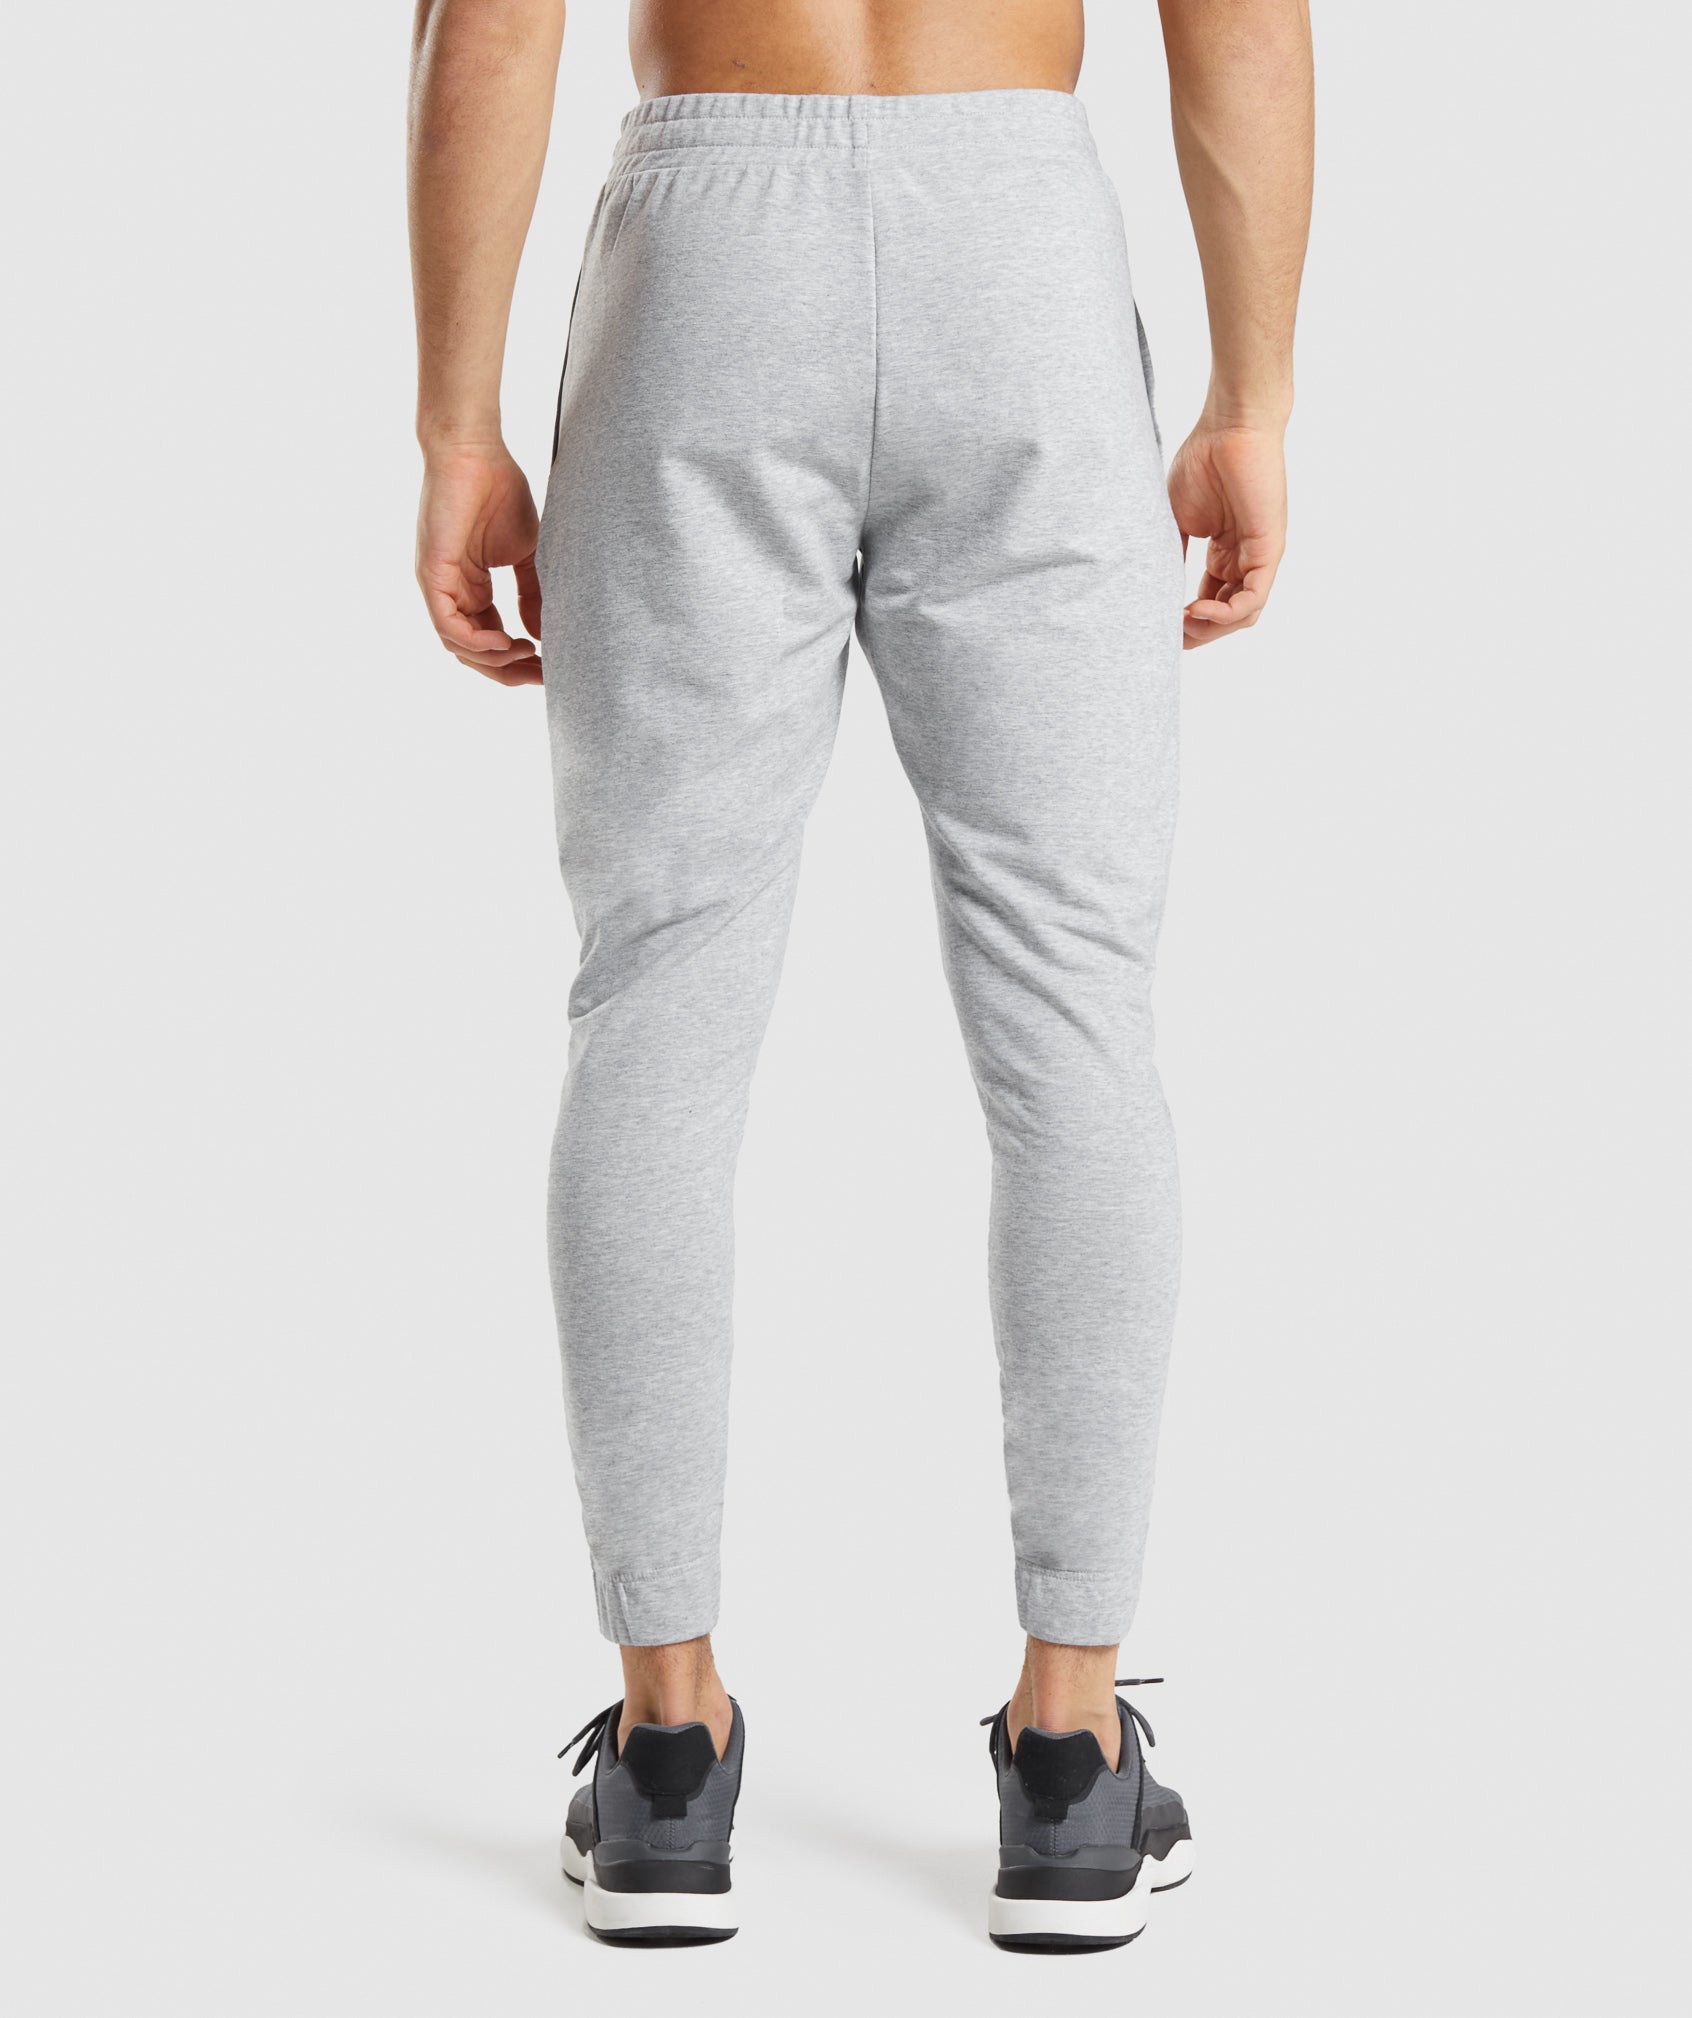 Critical 2.0 Joggers in Light Grey Marl - view 2